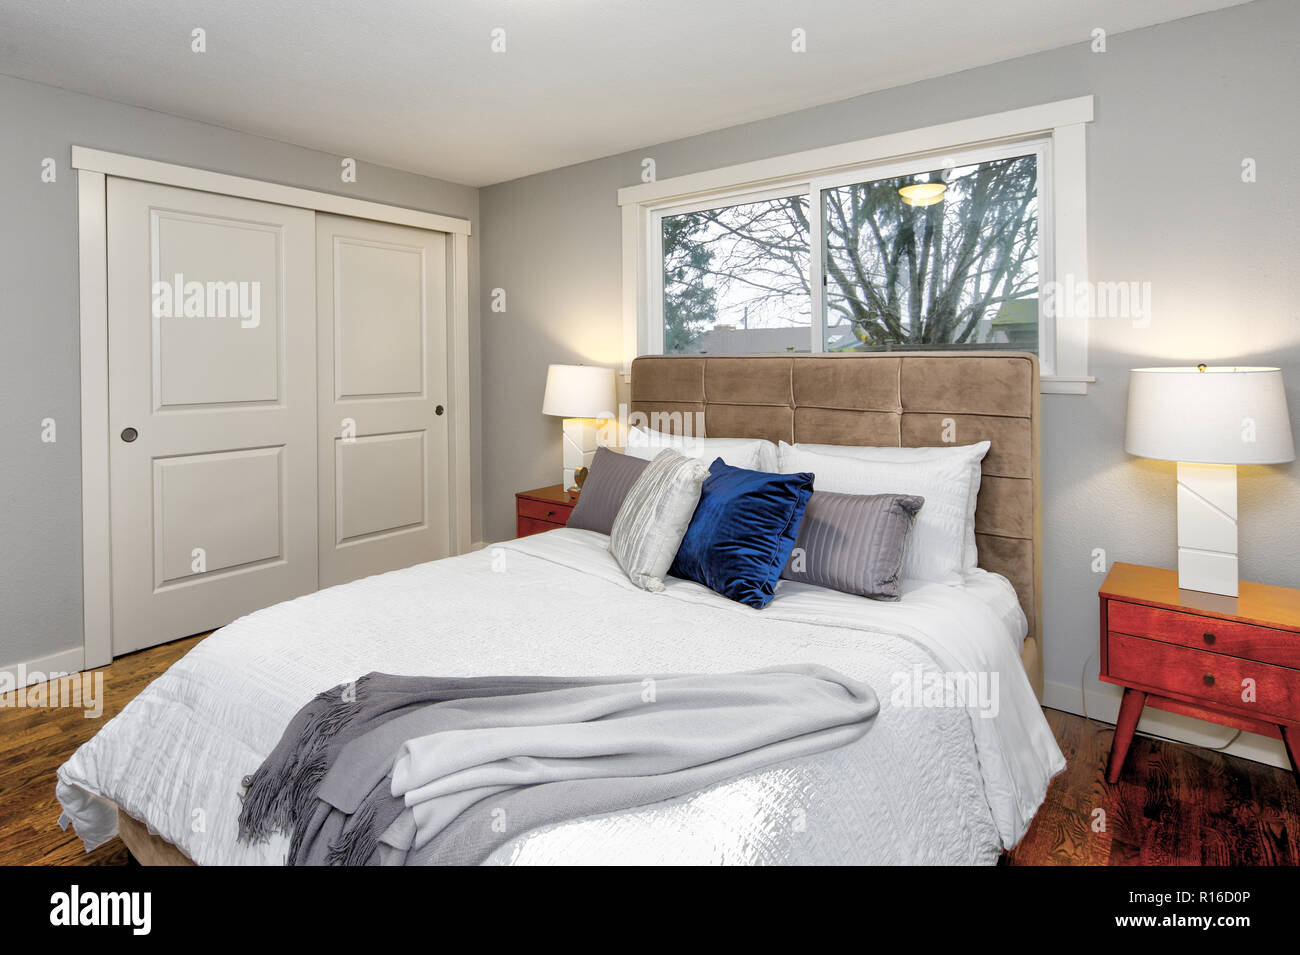 Gray Bedroom Interior With Huge Bed Tufted Headboard And Hardwood